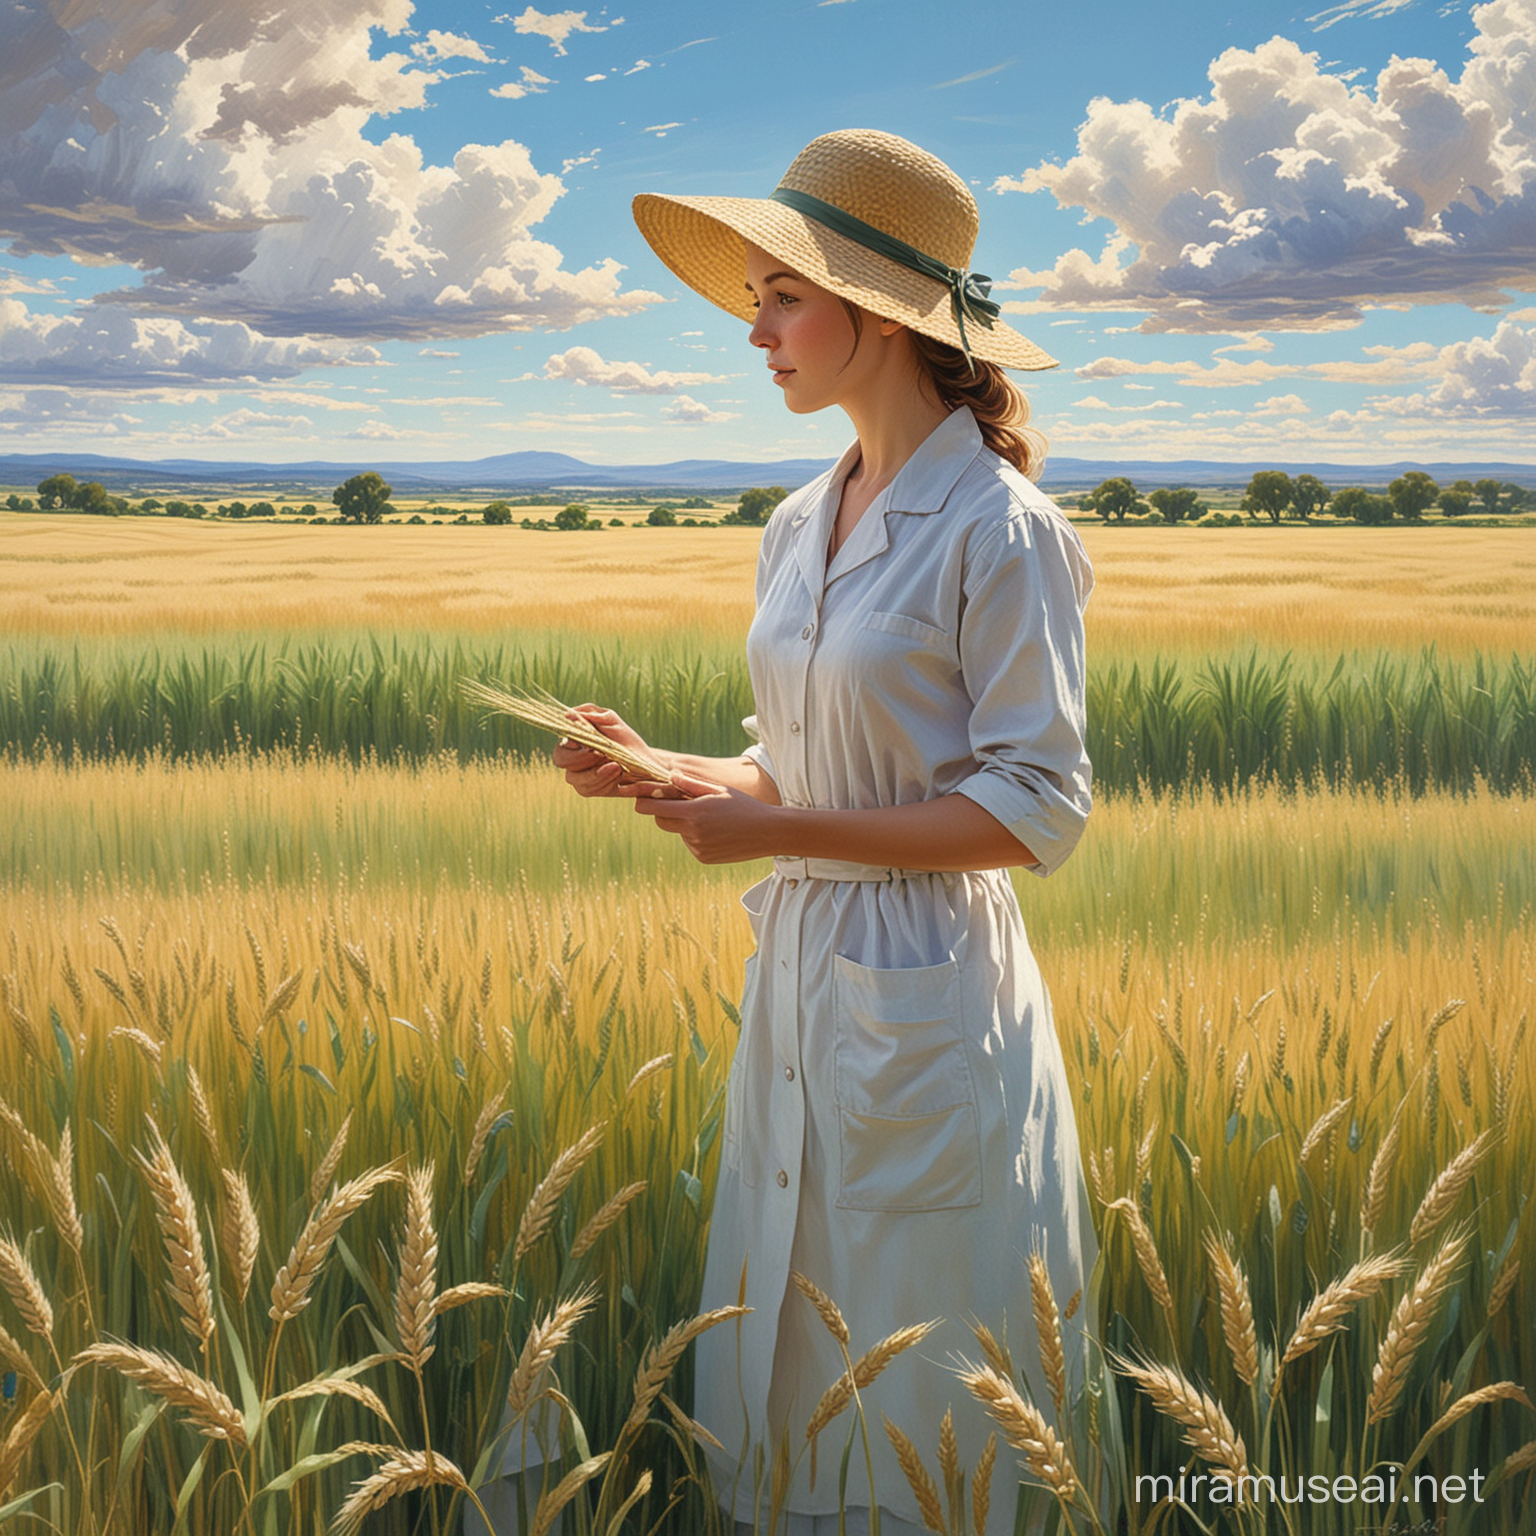 I want a pastel painting of a wheat field where the wheat is olive green and the sky is light blue with clouds.
At the same time, there was a laboratory doctor in a straw hat and white work clothes picking wheat.